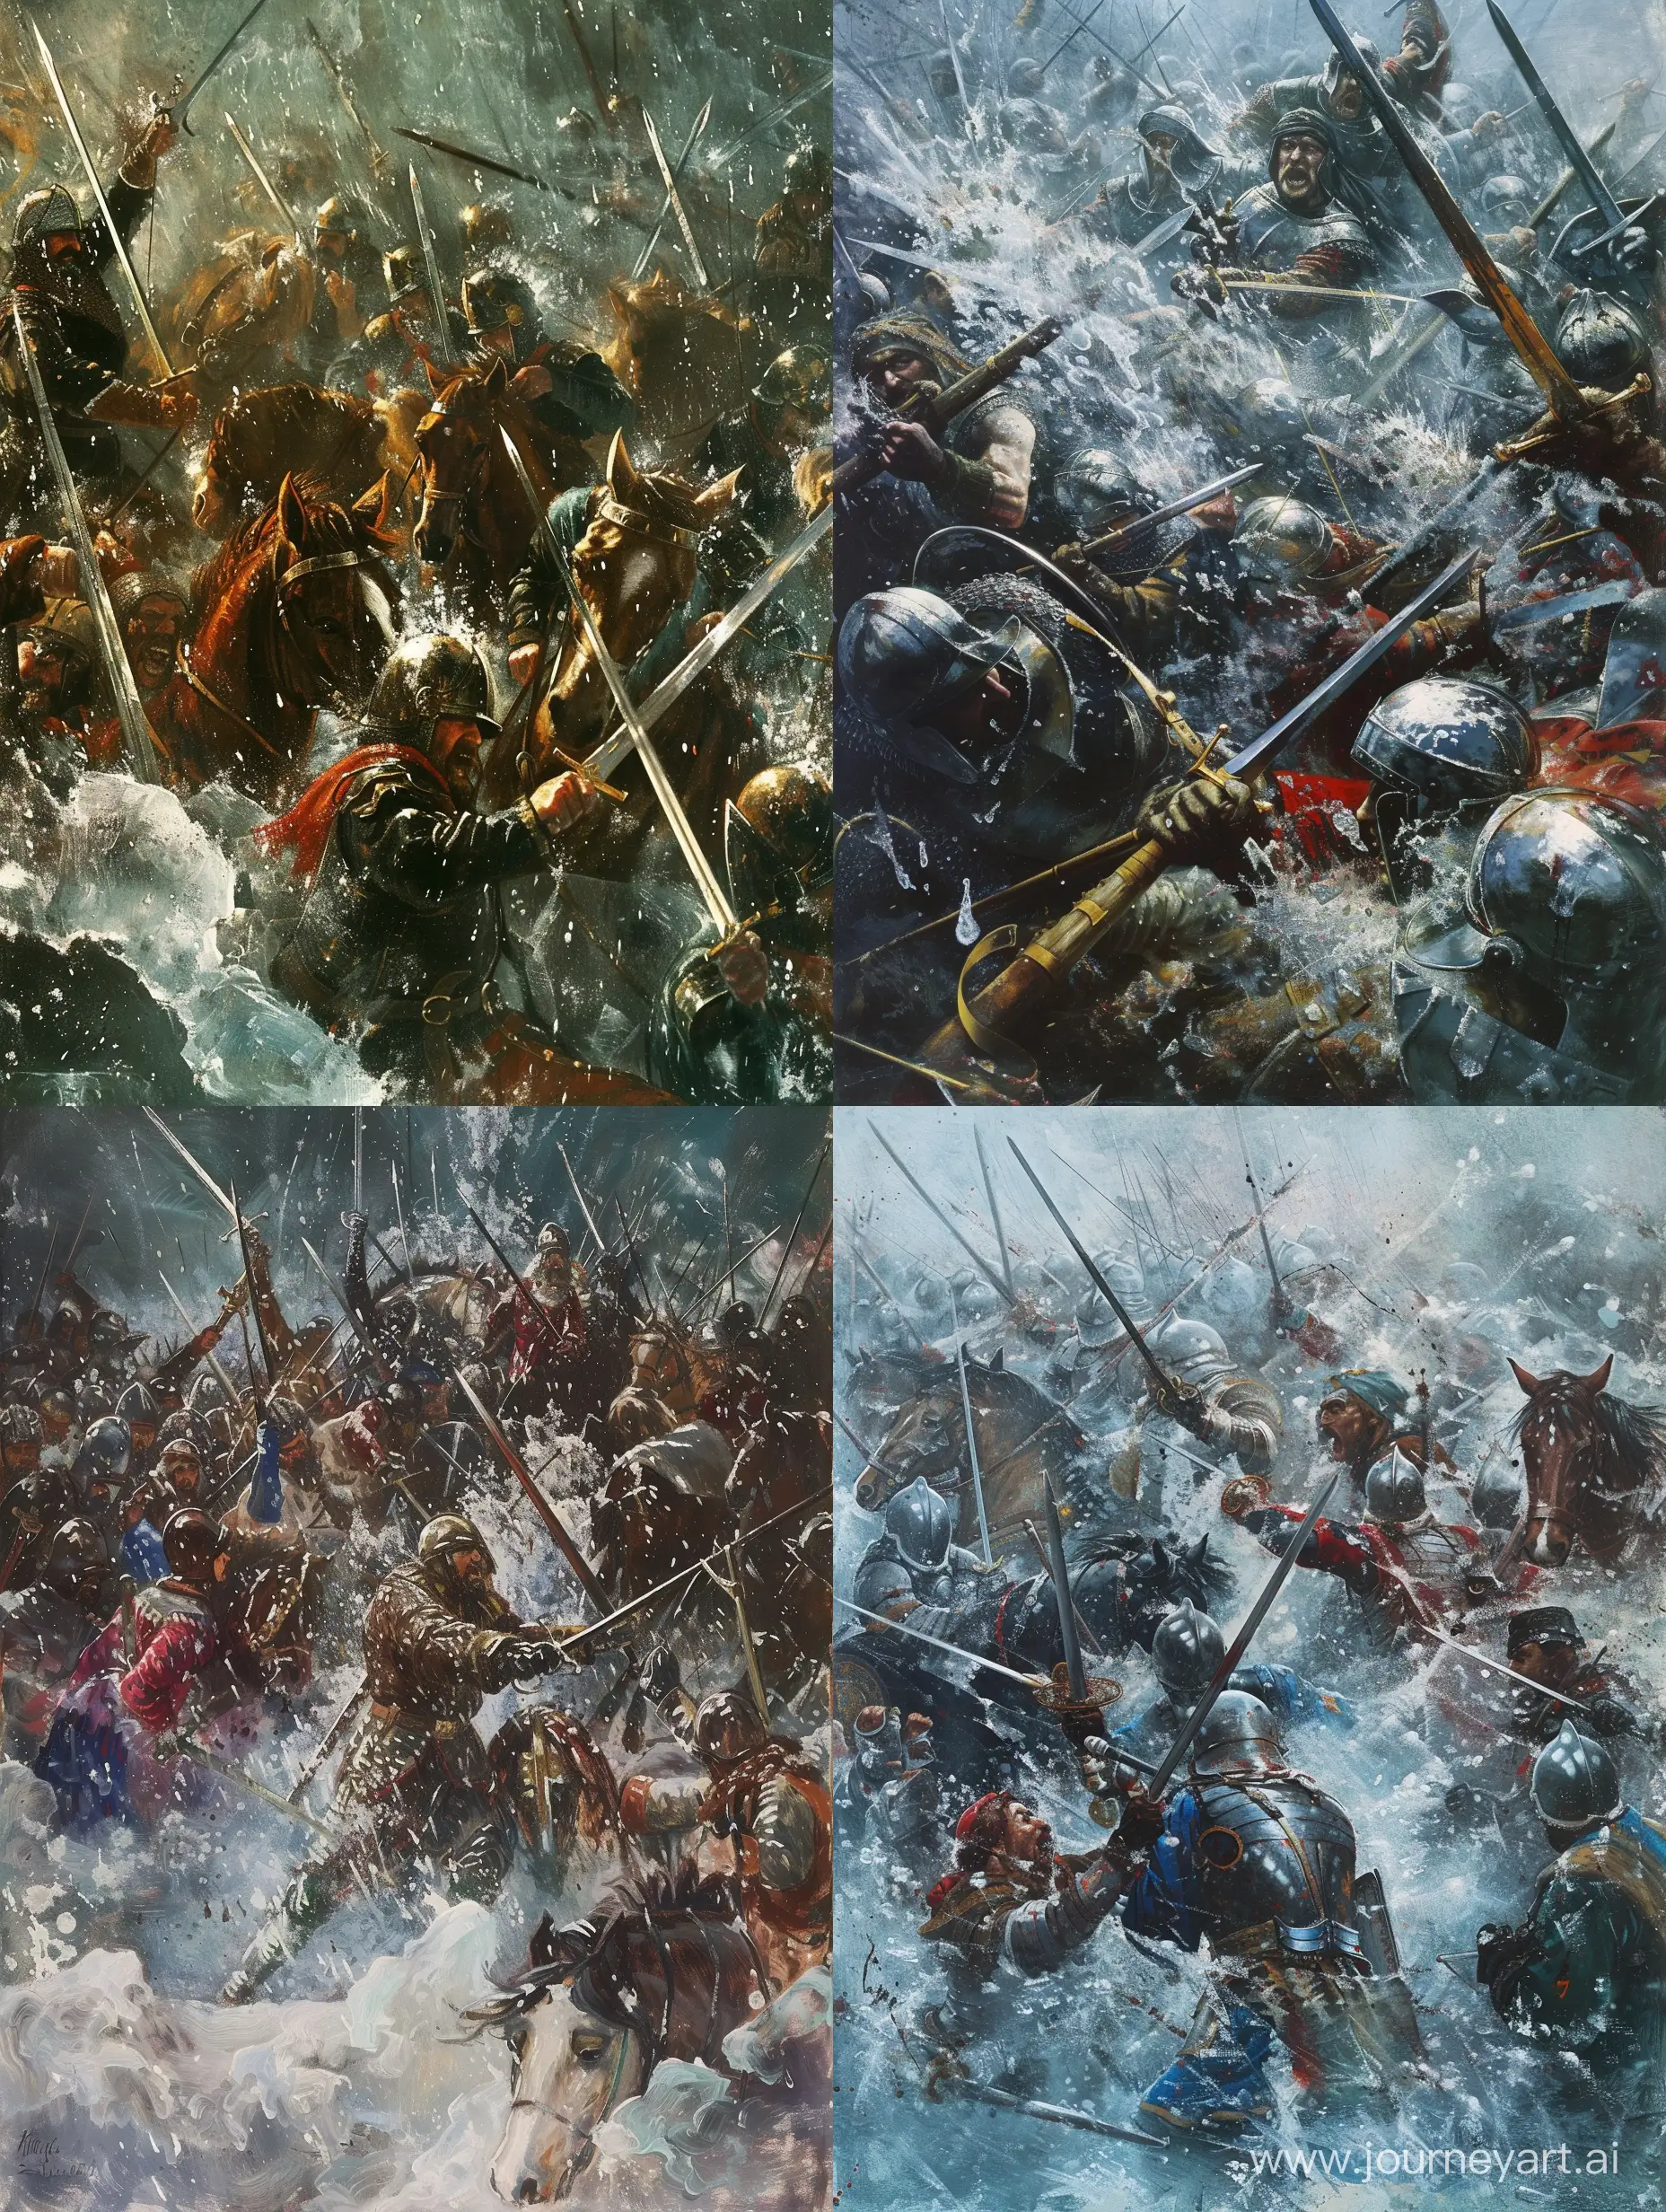 Epic-Battle-of-Alexander-Nevsky-Glittering-Ice-Swords-and-Helmets-Amidst-Chaos